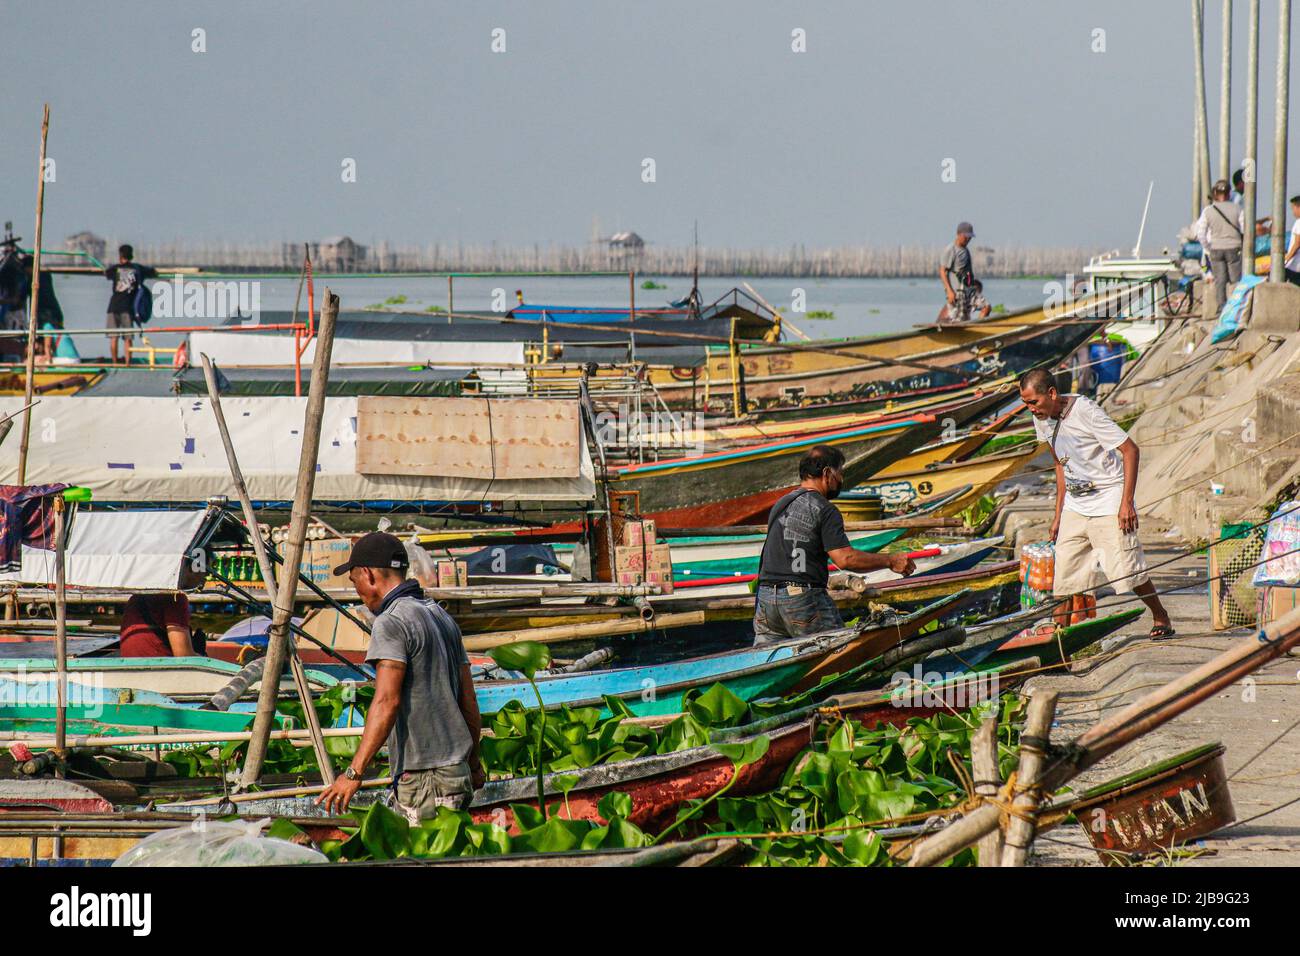 Binangonan, Philippines. 04th June, 2022. Fishermen anchor their boats at a fish port. Laguna Lake is the largest lake in the Philippines, covering a surface of 900 square kilometers or equivalent to 90,000 hectares. Its water runs from Laguna Province all the way to the Province of Rizal, the southern part of Luzon. The lake provides resources like transportation, recreation, livelihood, and most importantly food for the surrounding communities. Laguna Lake is classified as Class C freshwater which has the capability to grow fish and other aquatic resources. Some watershed near Metro Manila c Stock Photo